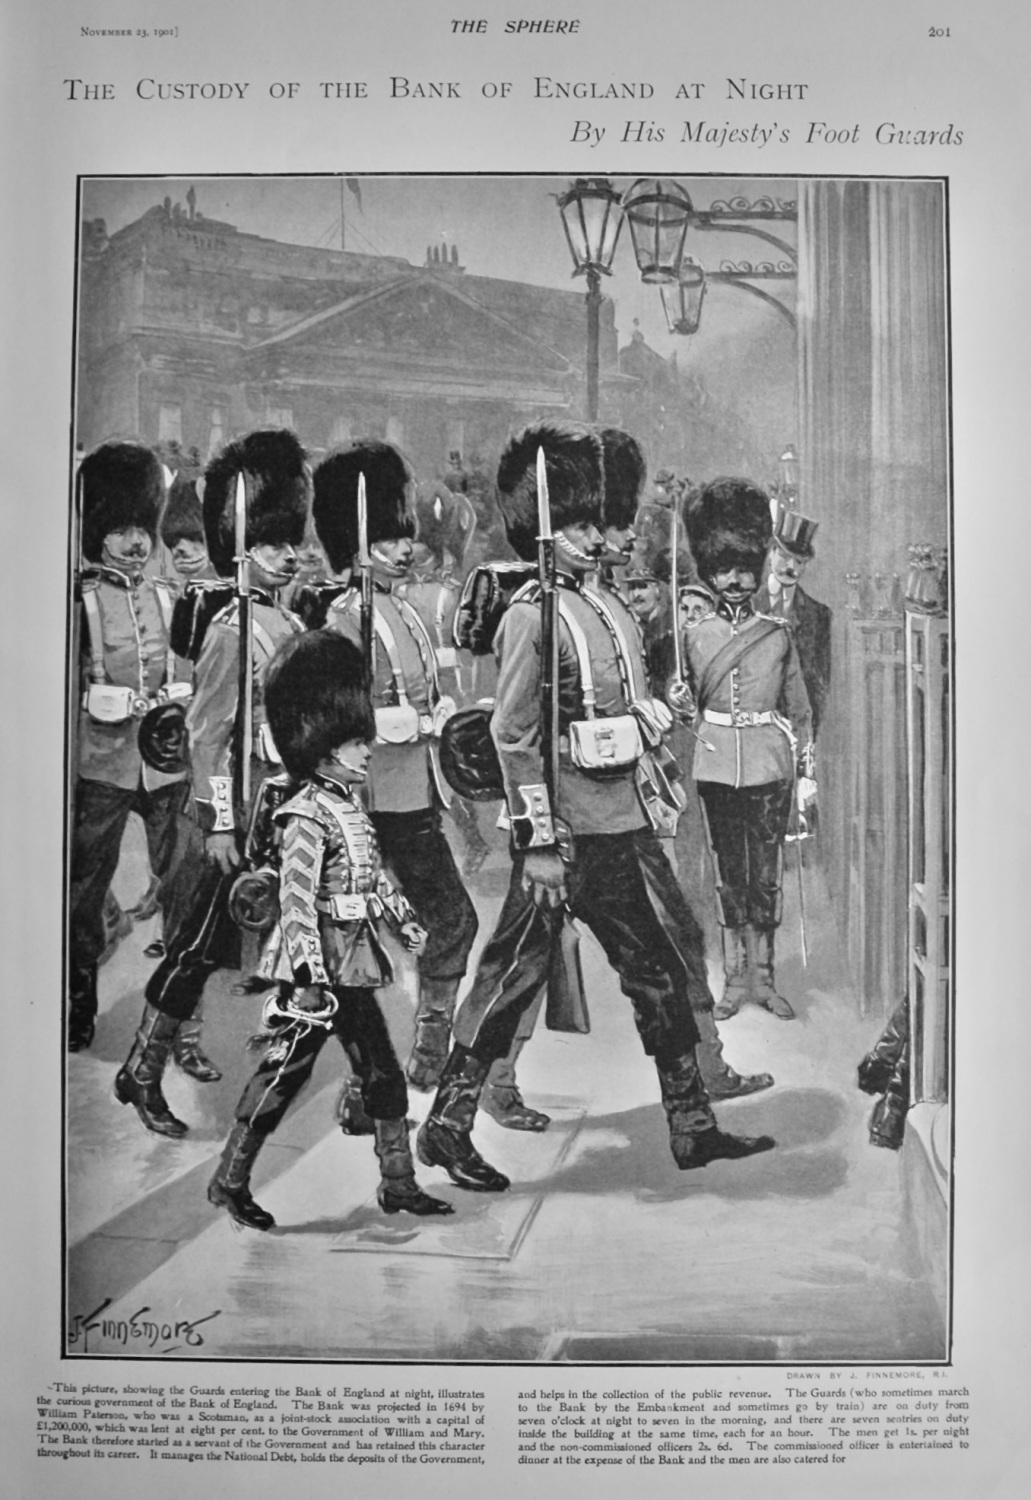 The Custody of the Bank of England at Night by His Majesty's Foot Guards.  